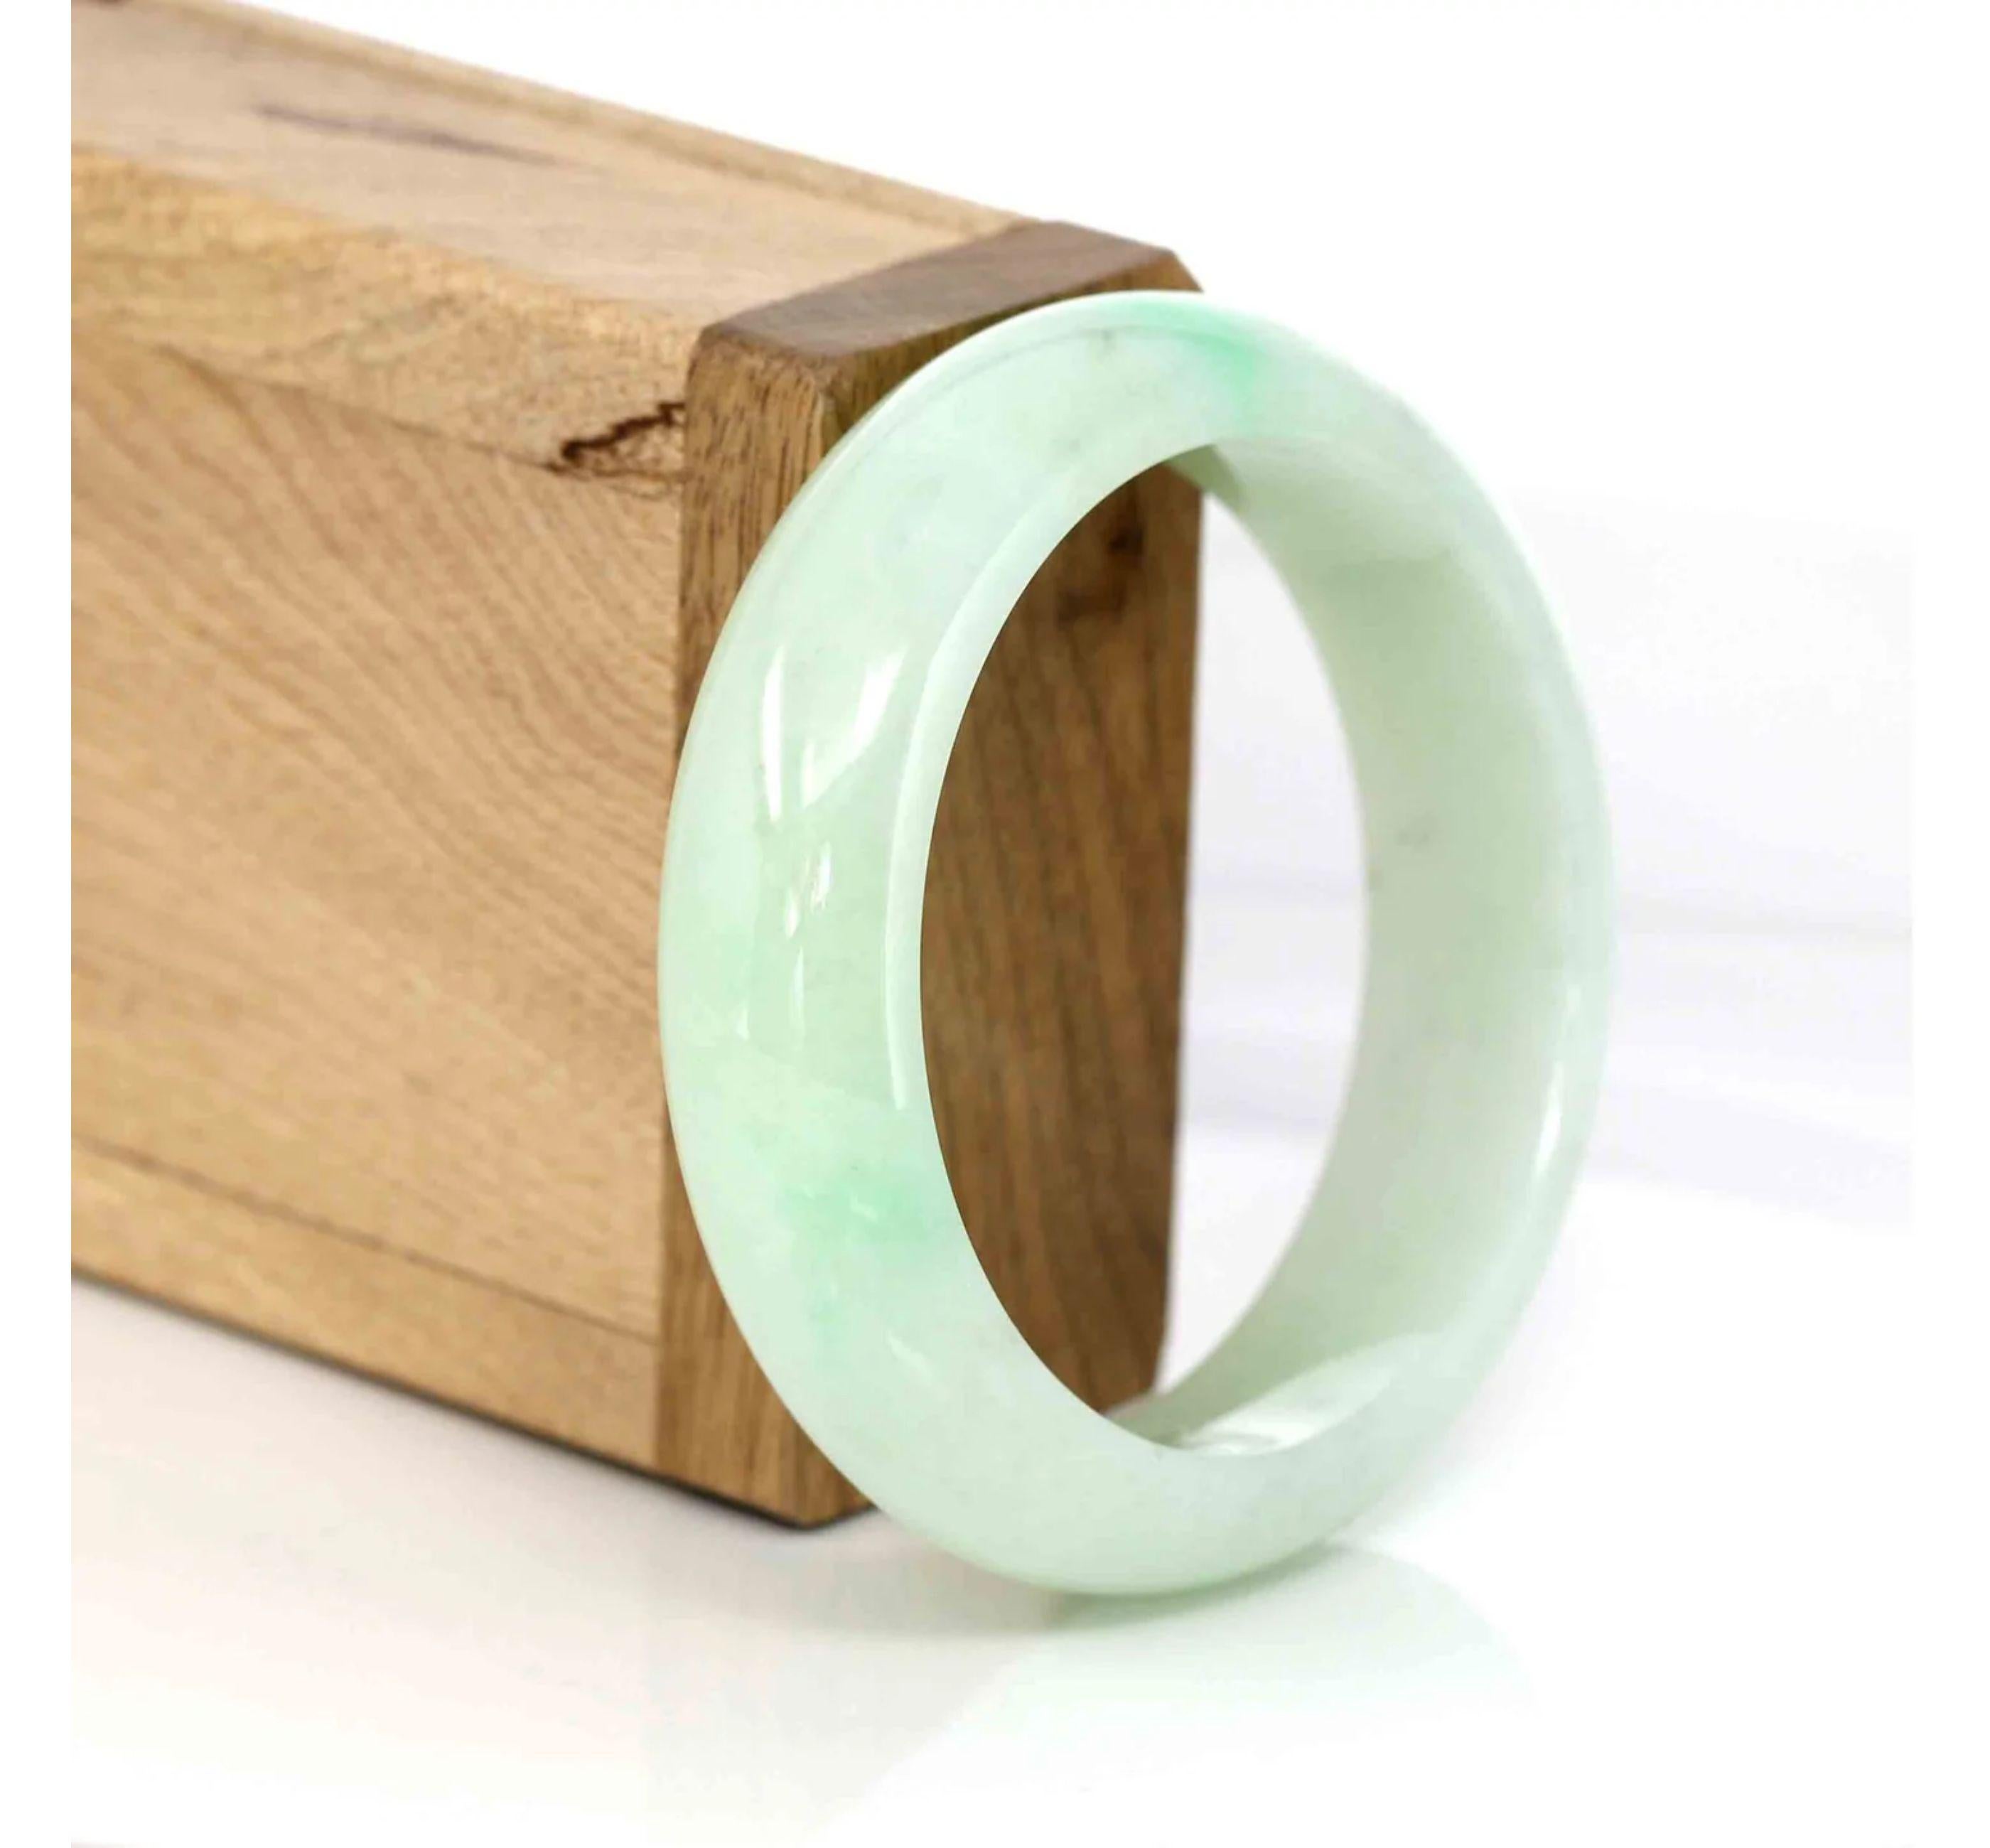 * DETAILS--- This bangle is made with fine genuine Burmese Jadeite jade. The jade texture is very good and smooth with light green. and looks very clear with whole light green color. It's a perfect wider bangle with half-round comfort style